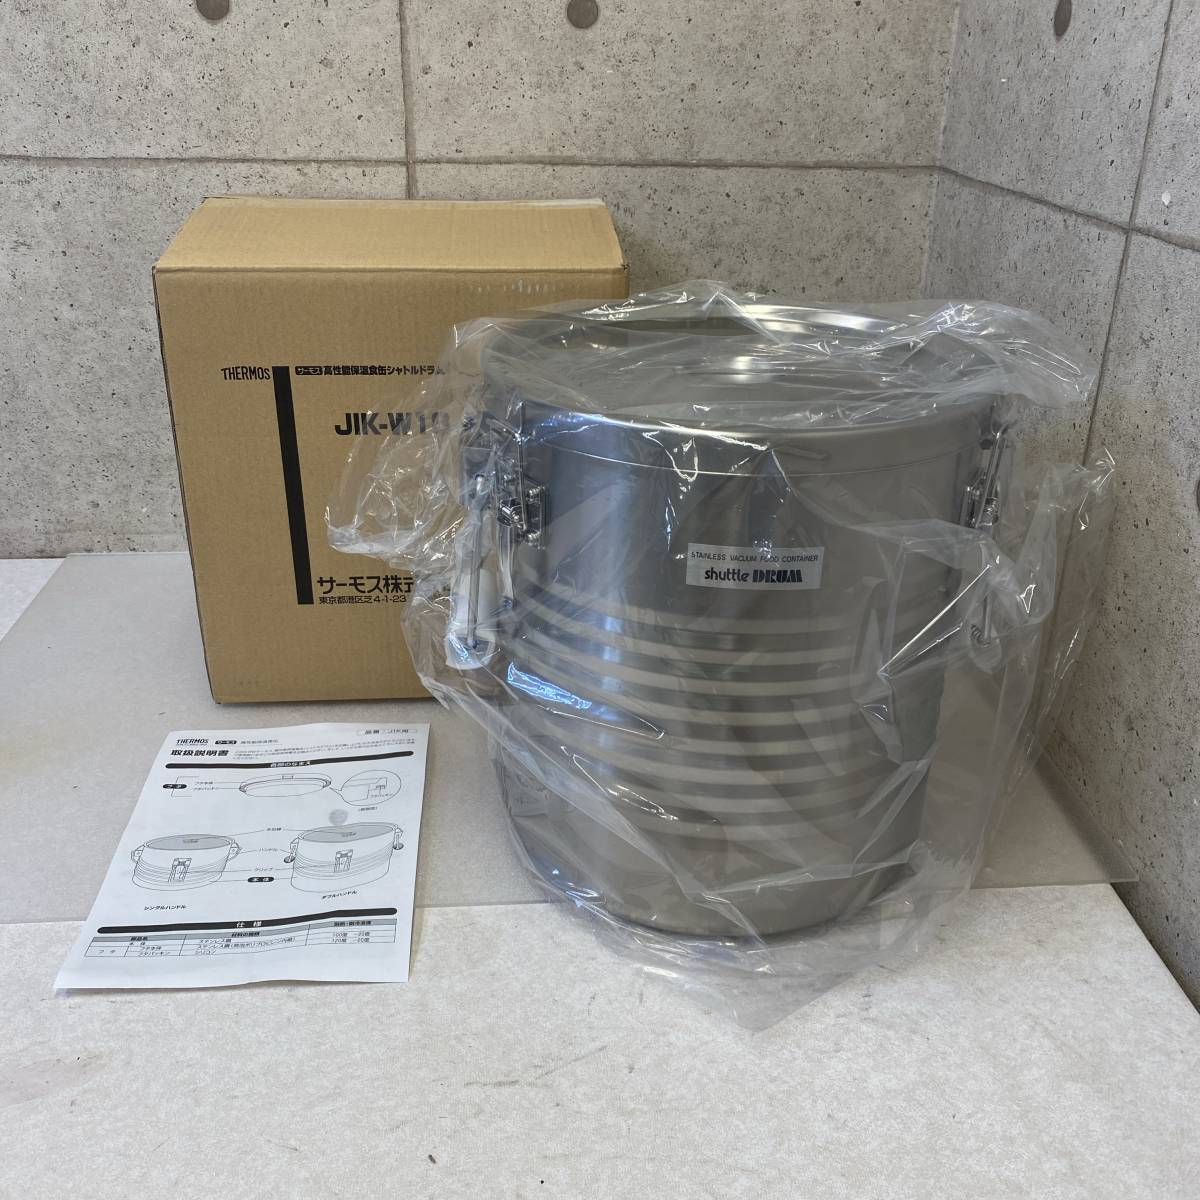 [ price cut Saitama departure free shipping ] new goods unused business use height performance heat insulation meal can Thermos JIK-W18 18L original box * manual attaching kitchen . meal distribution meal A217-4